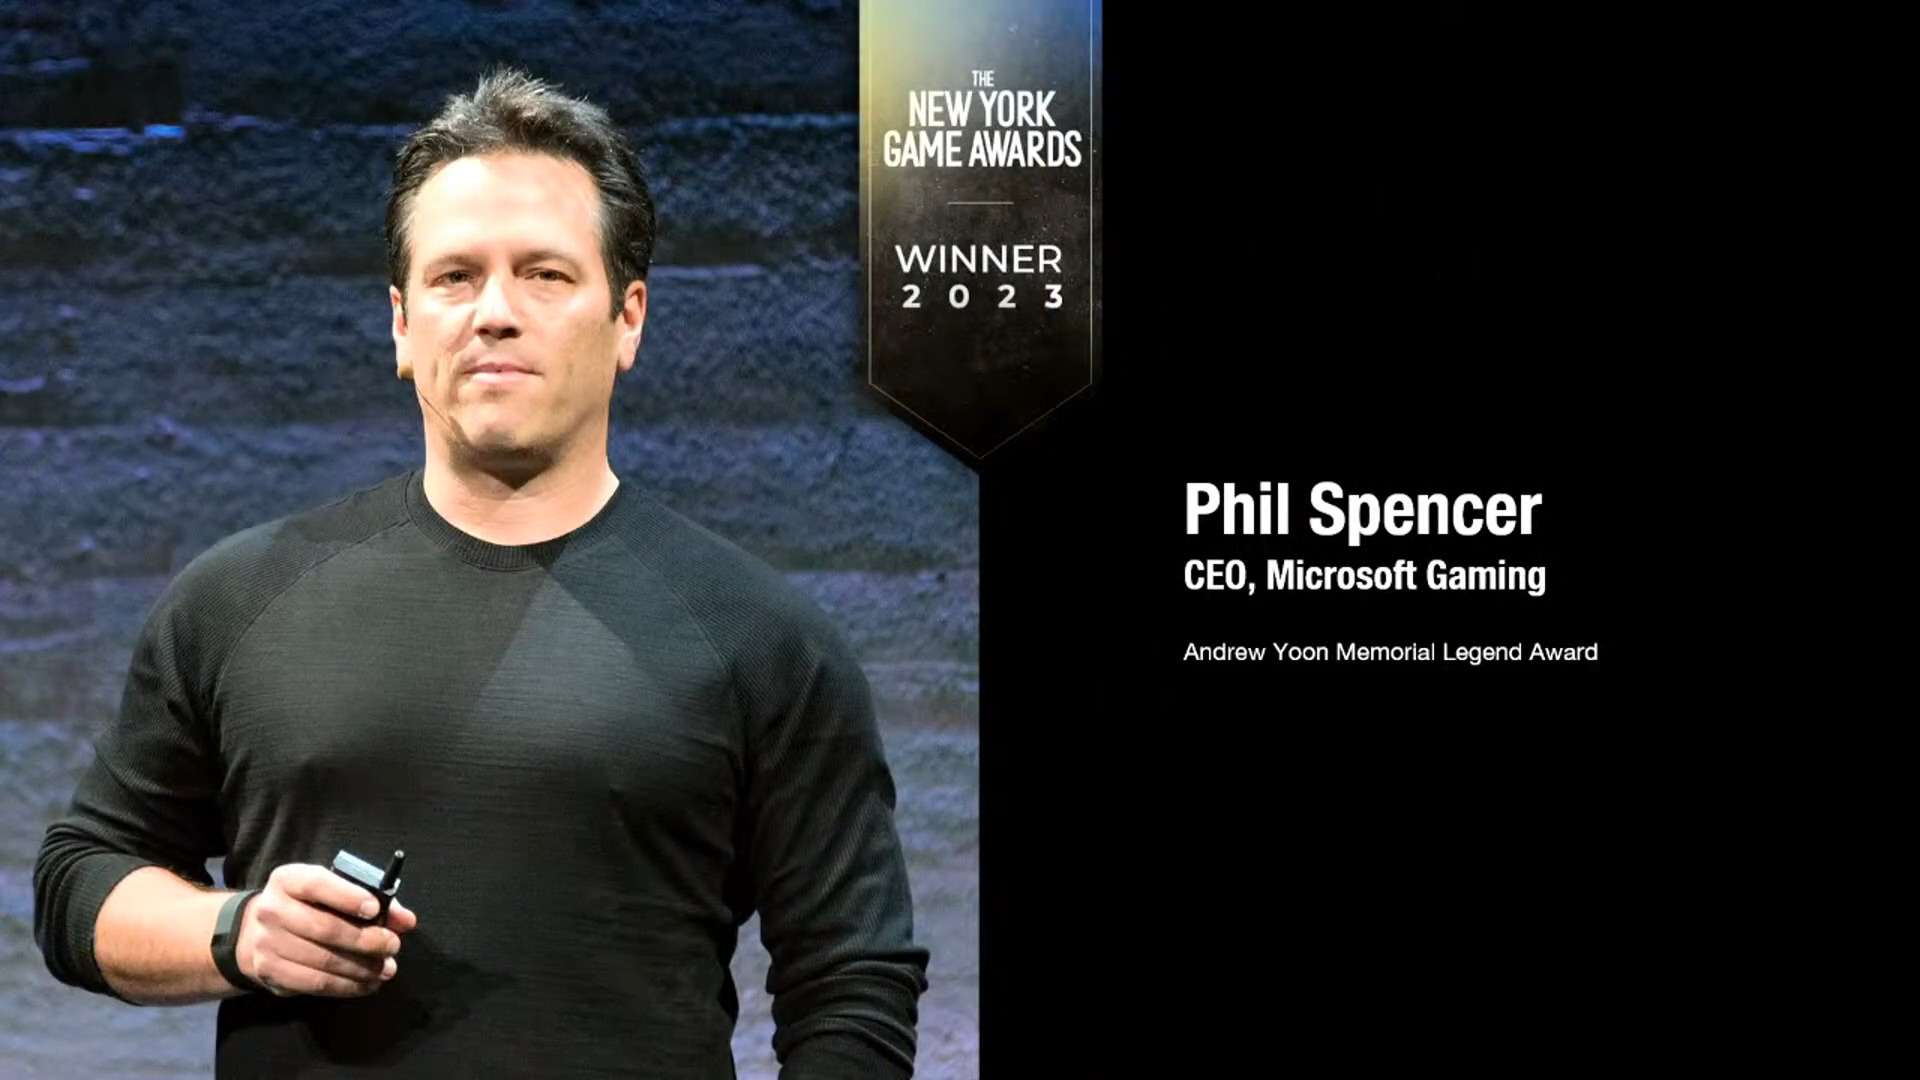 Xbox head Phil Spencer receives the 2022 New York Game Awards' Andrew Yoon Memorial Legend Award